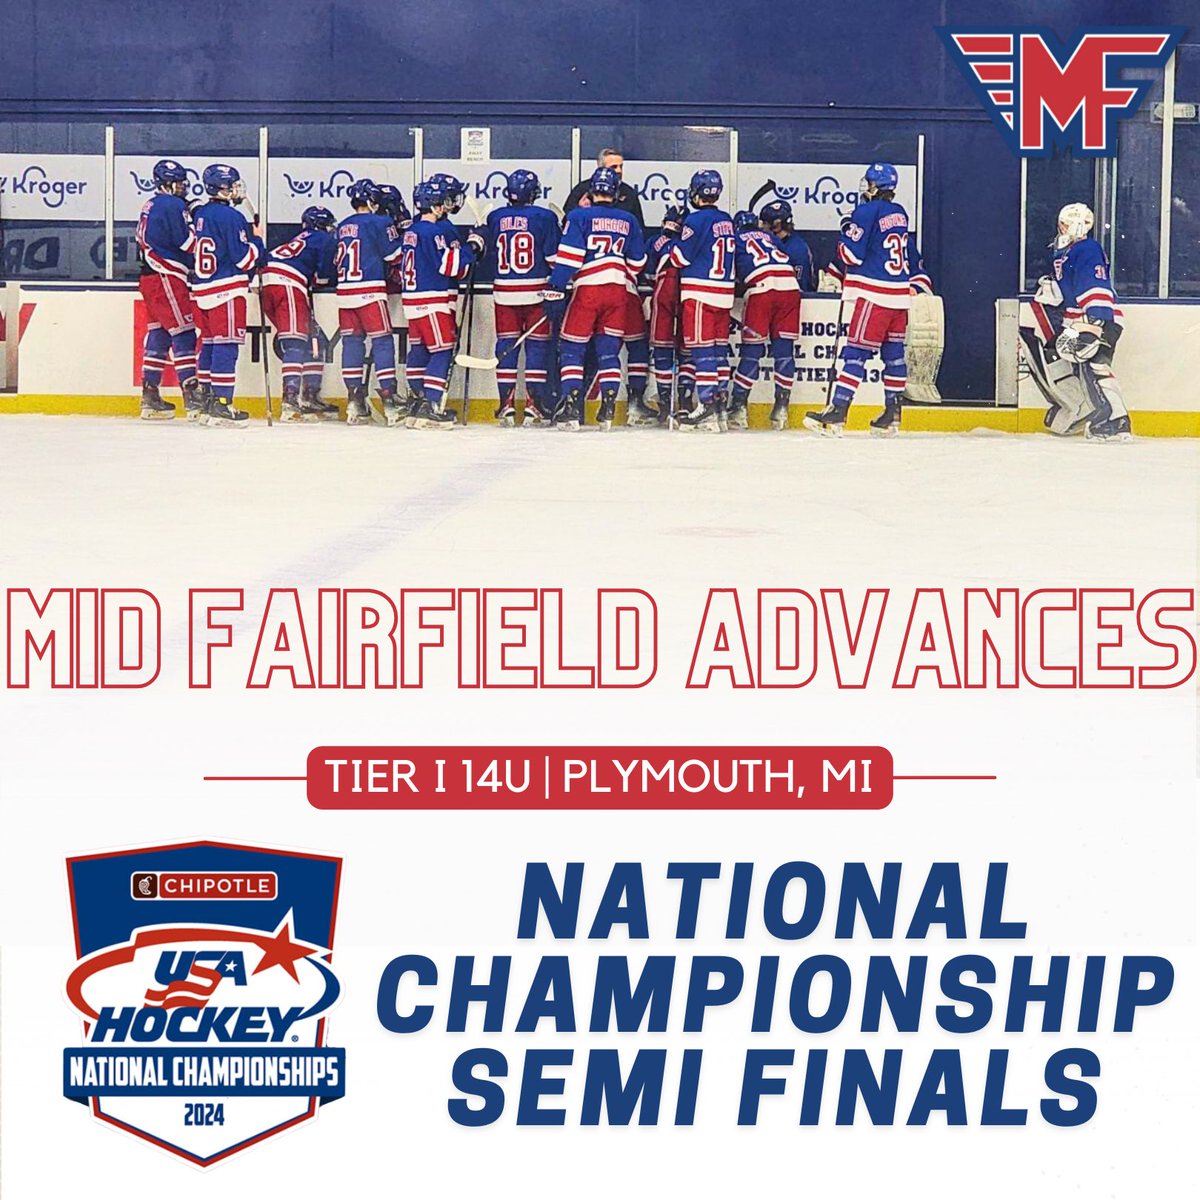 09s are moving on after a 2-1 win over Honeybaked!! #RollMF #usahnationals